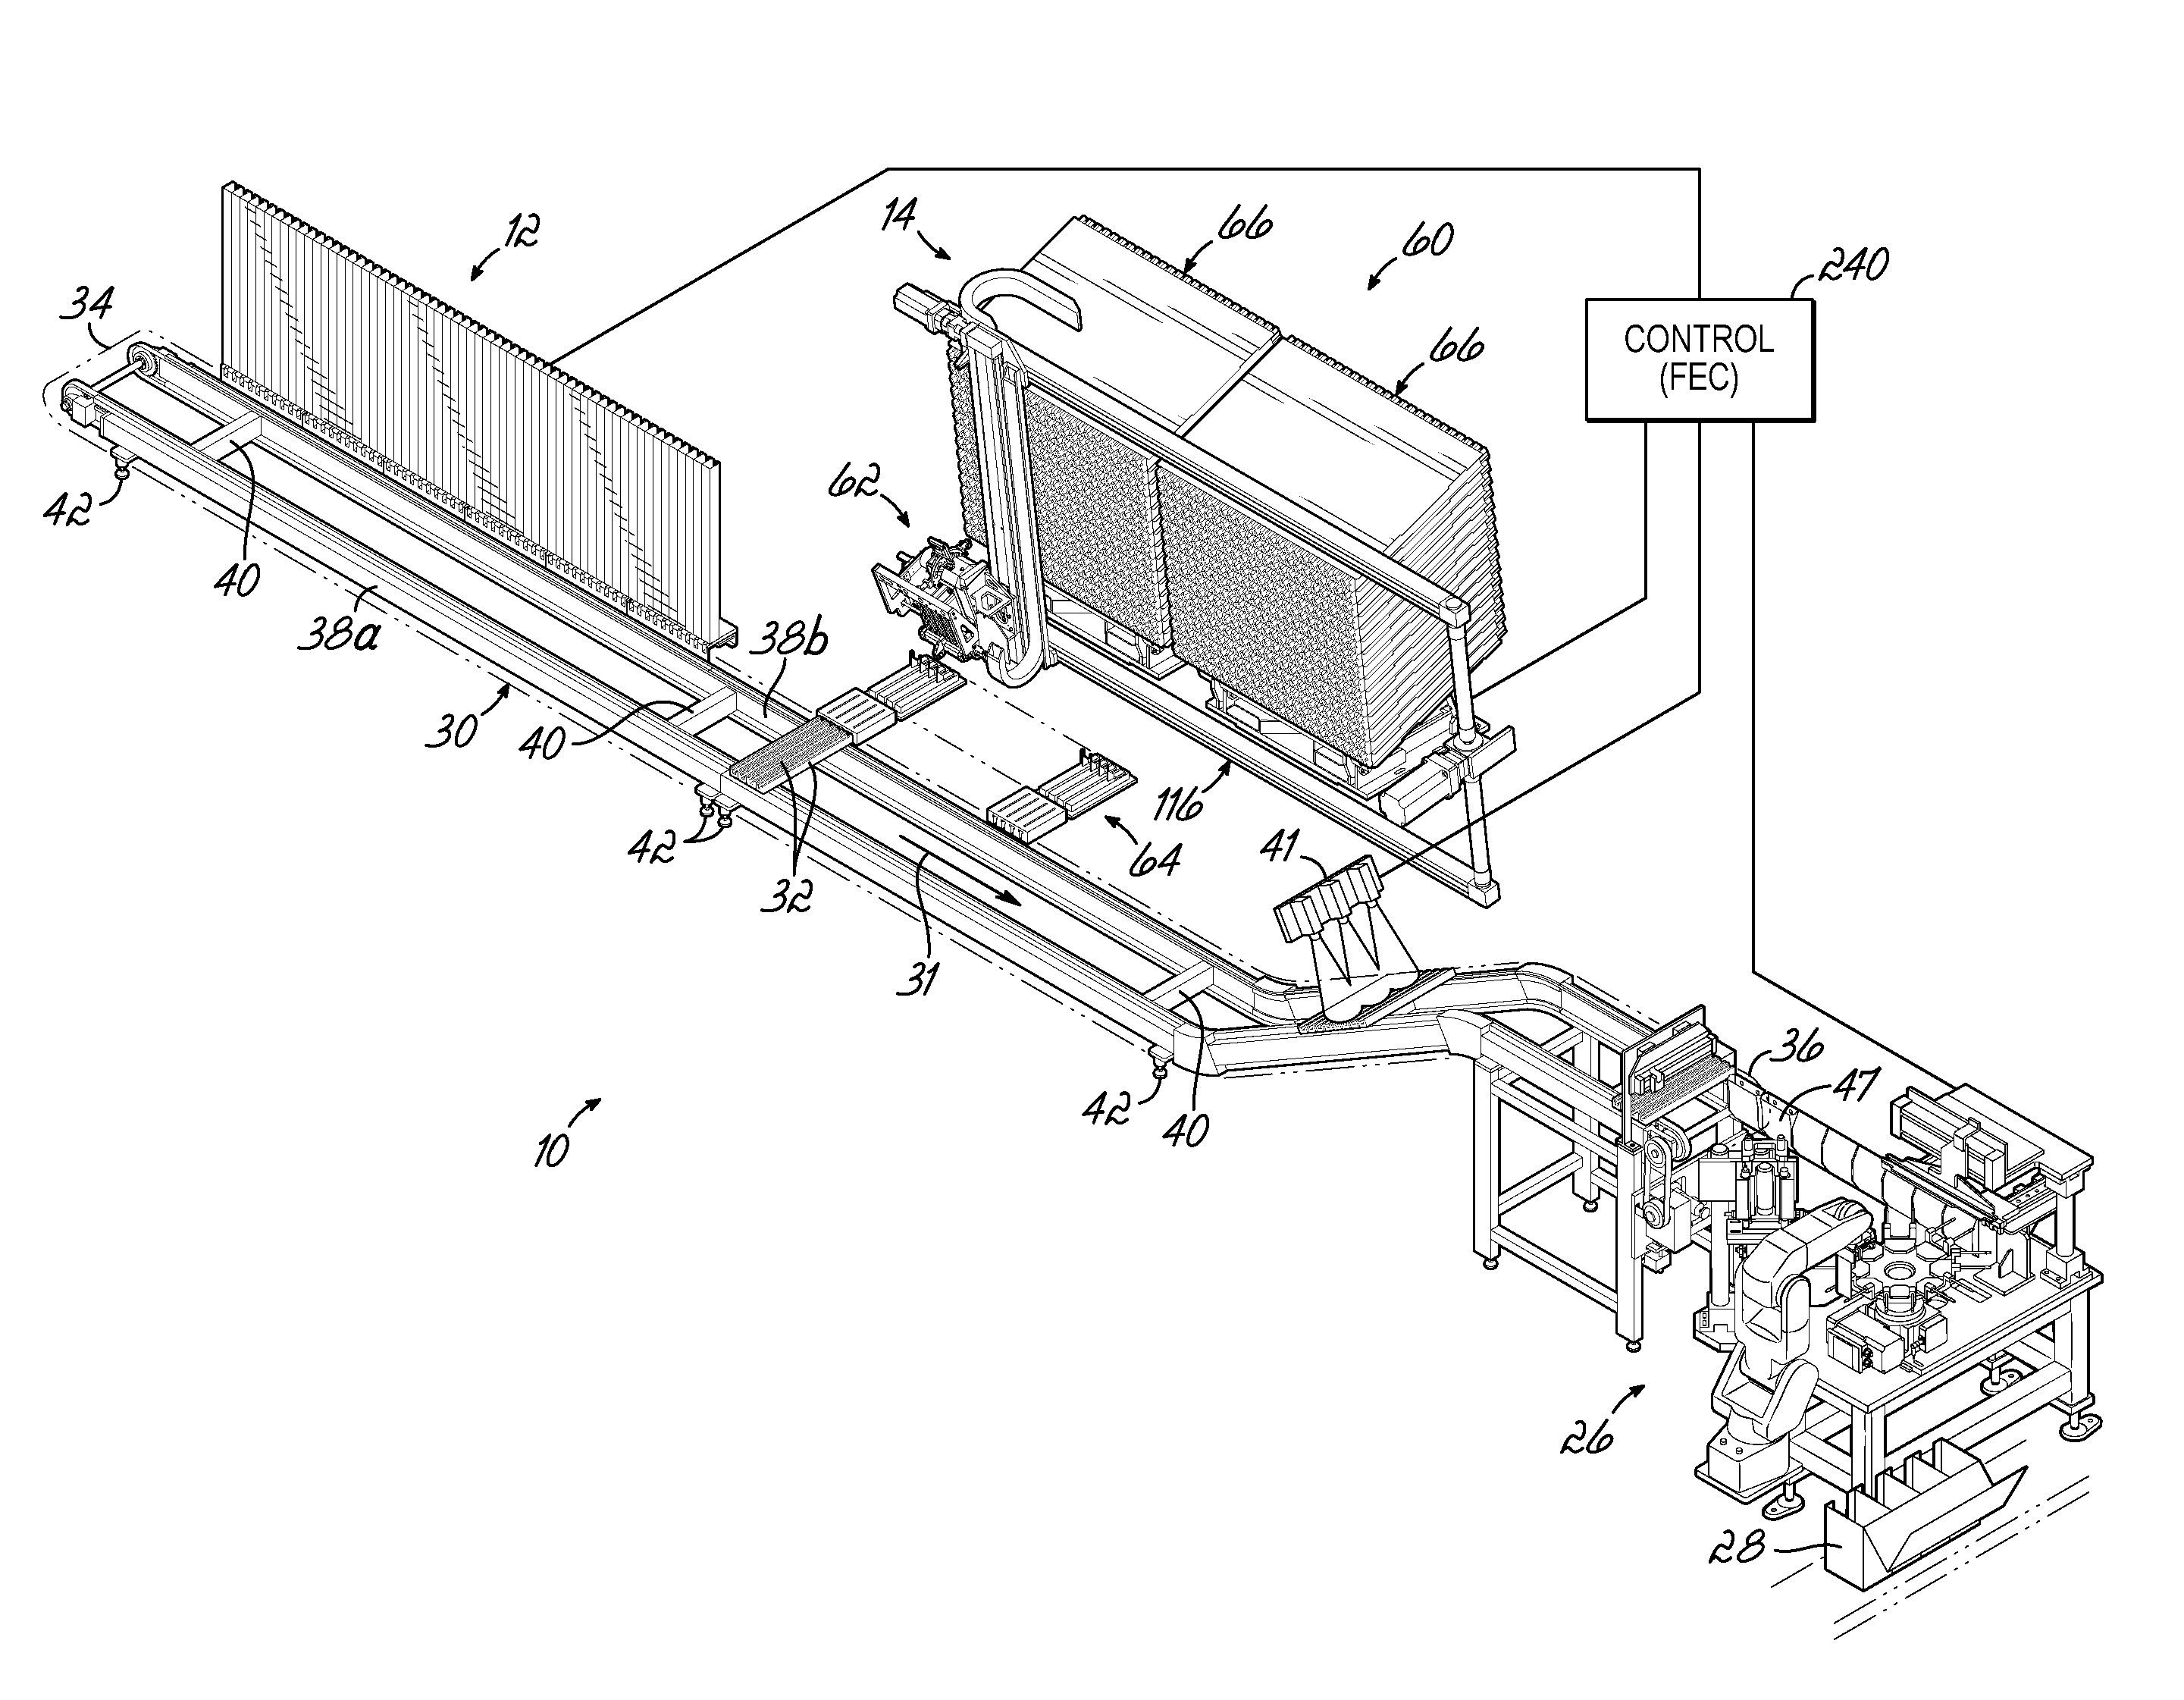 Pharmaceutical dispensing system and associated method